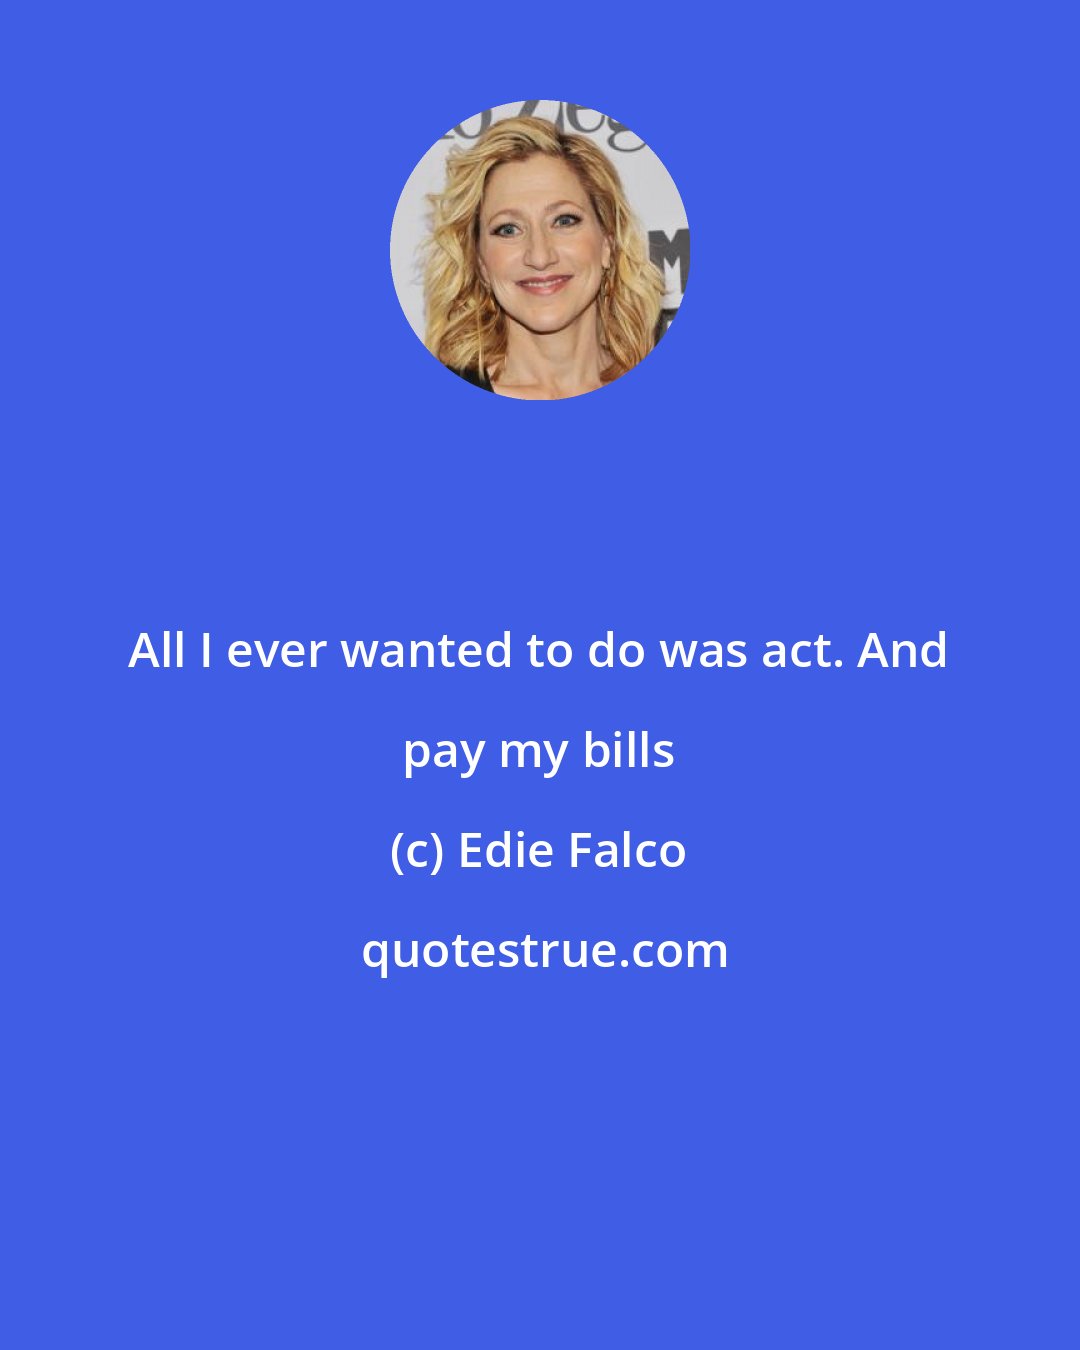 Edie Falco: All I ever wanted to do was act. And pay my bills